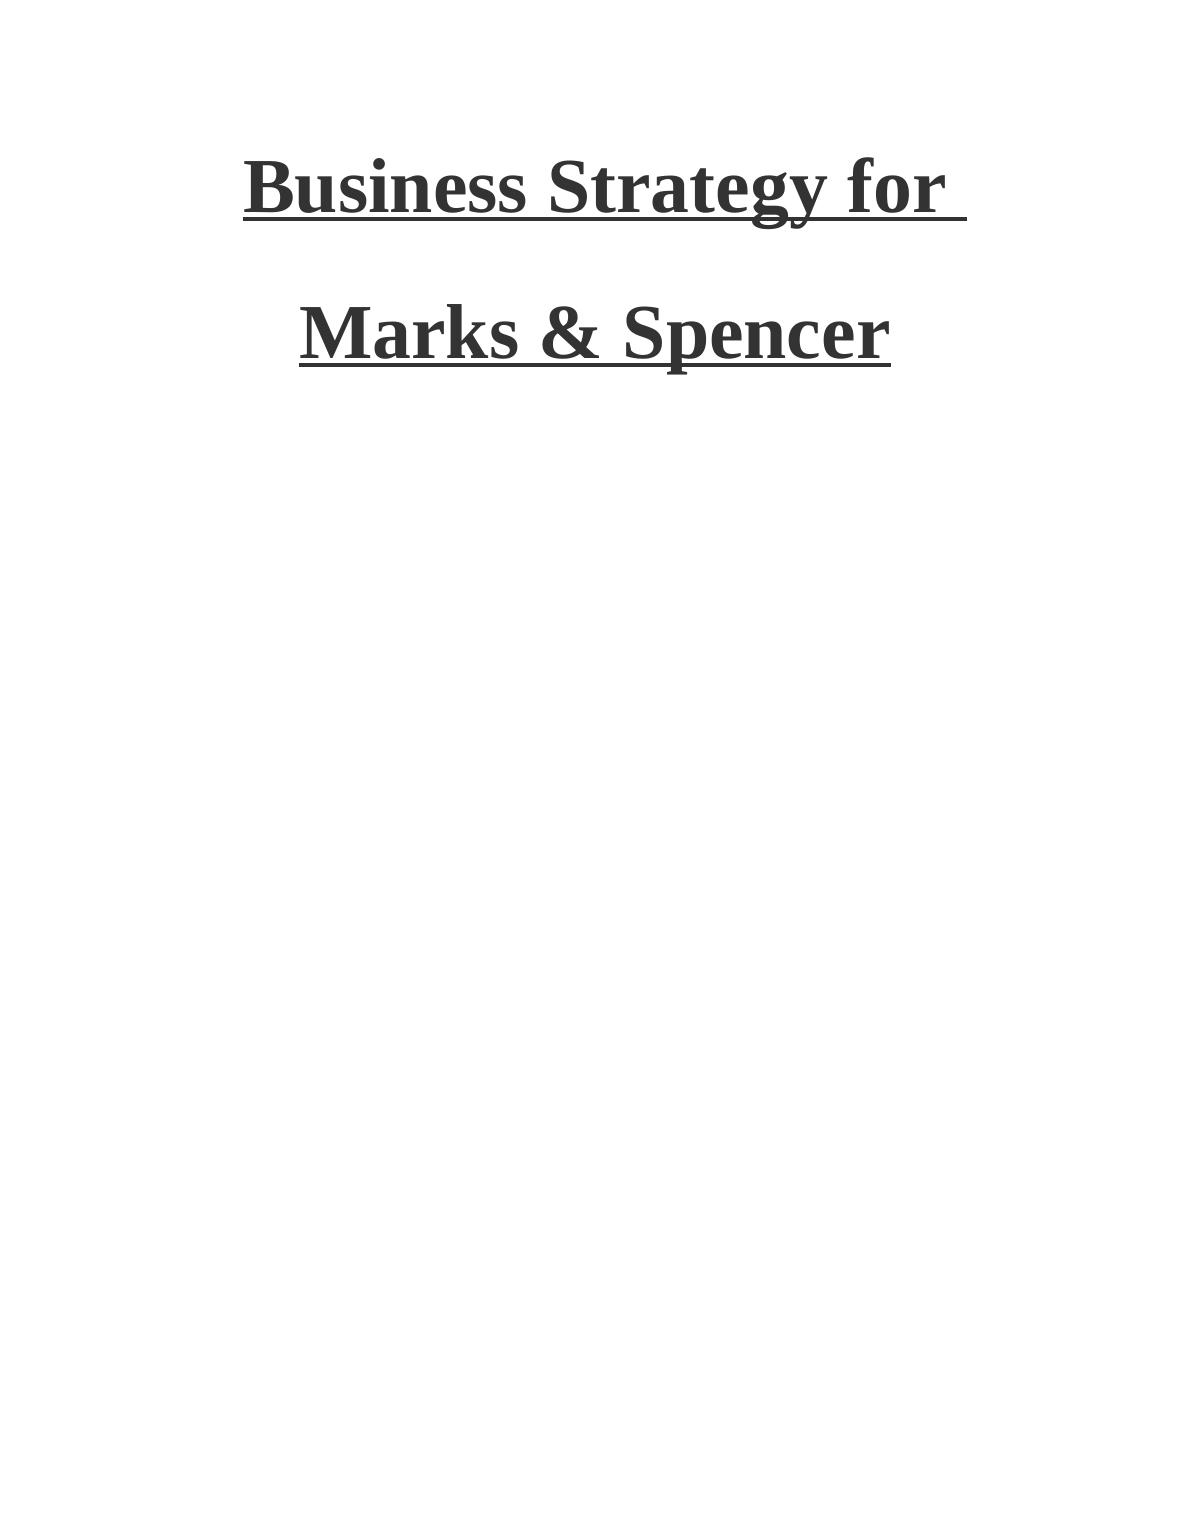 Business Strategy for Marks & Spencer_1